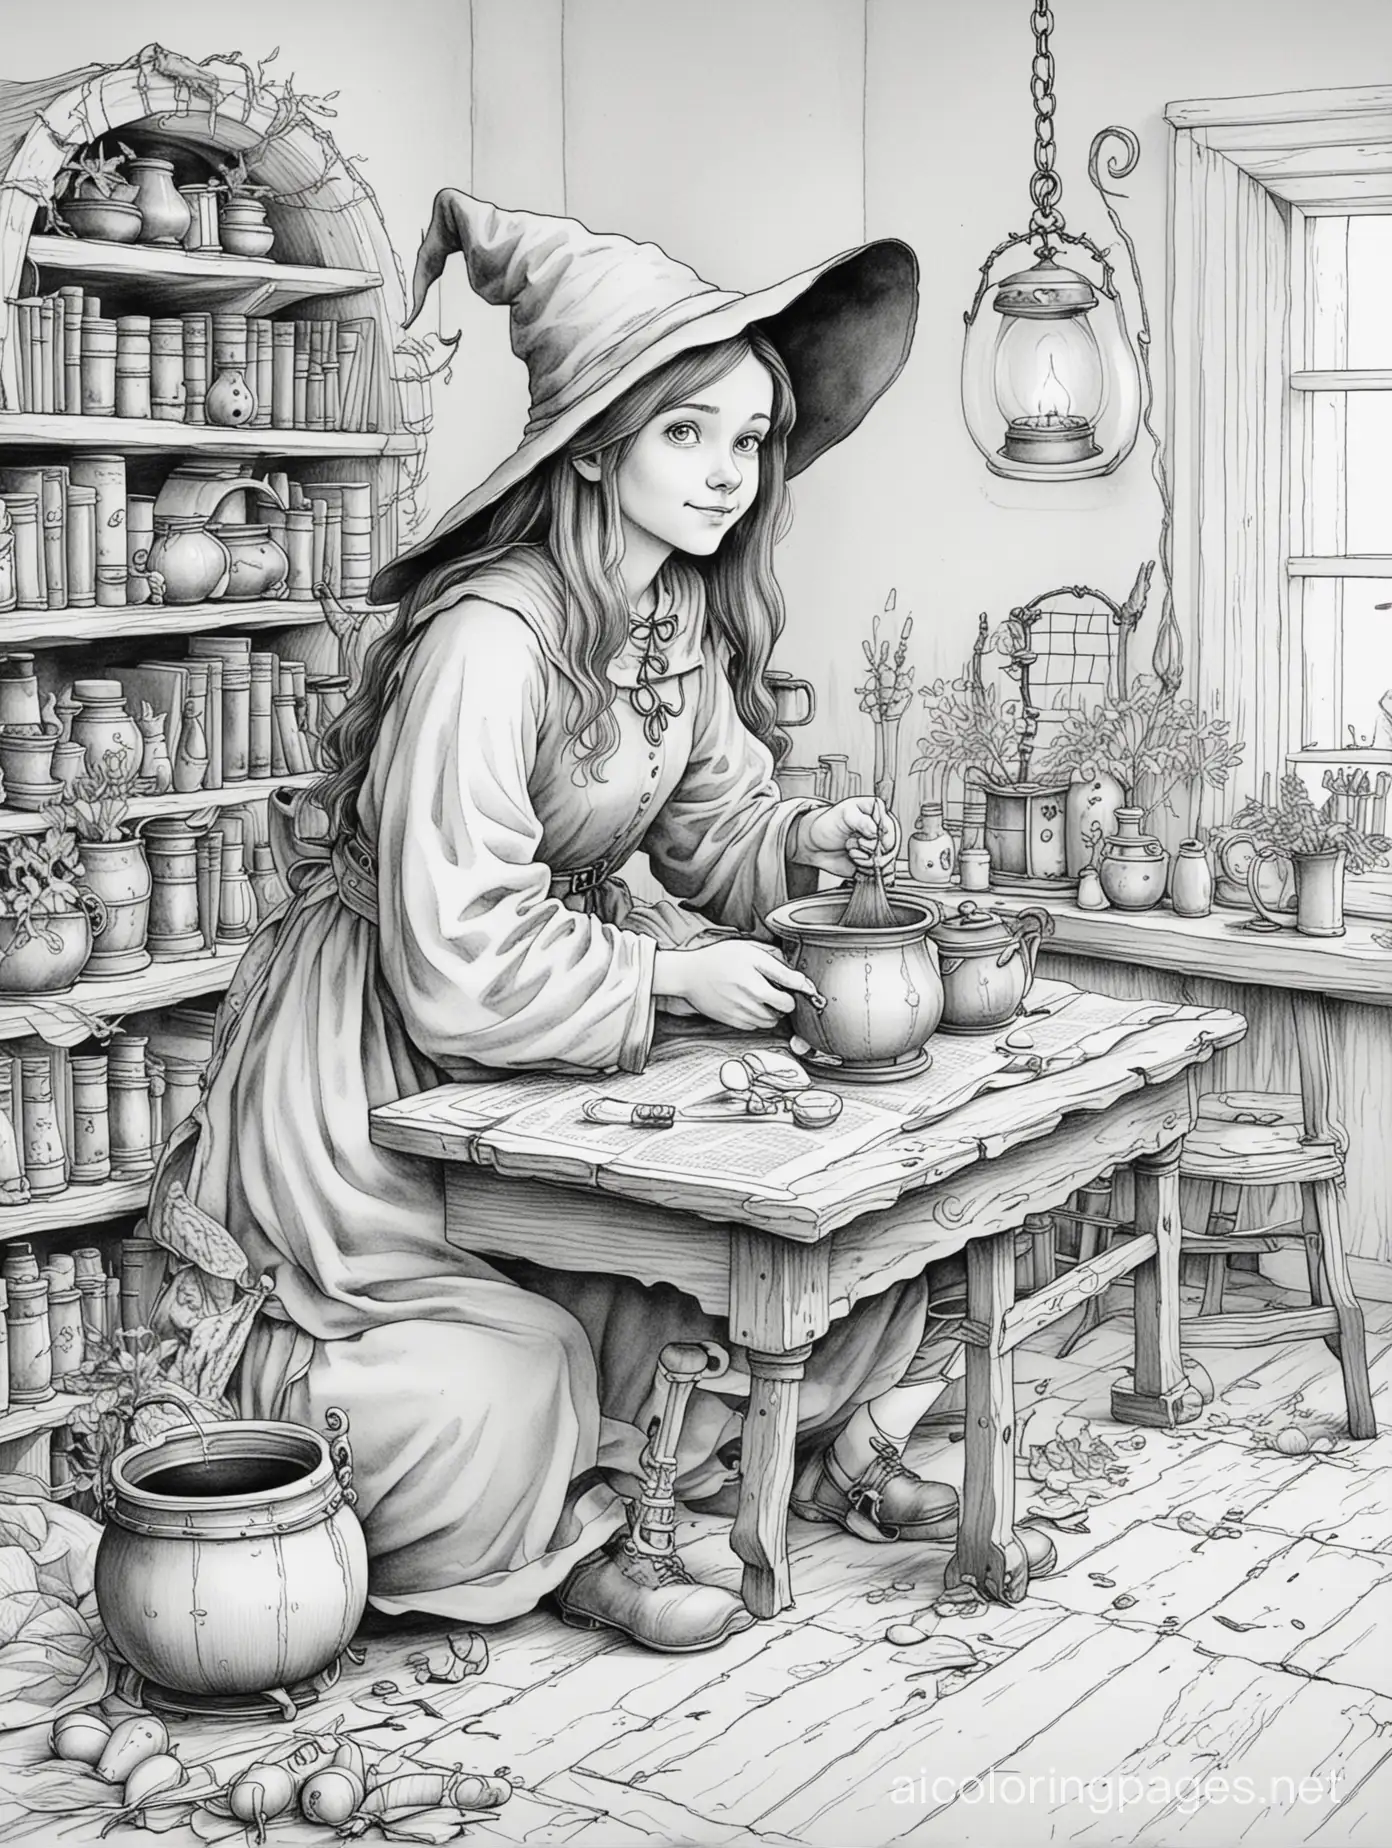 a witch sitting at a table in a room with a cauldron. add shelves with potions and beekers. add lots of old scary looking books., Coloring Page, black and white, line art, white background, Simplicity, Ample White Space. The background of the coloring page is plain white to make it easy for young children to color within the lines. The outlines of all the subjects are easy to distinguish, making it simple for kids to color without too much difficulty